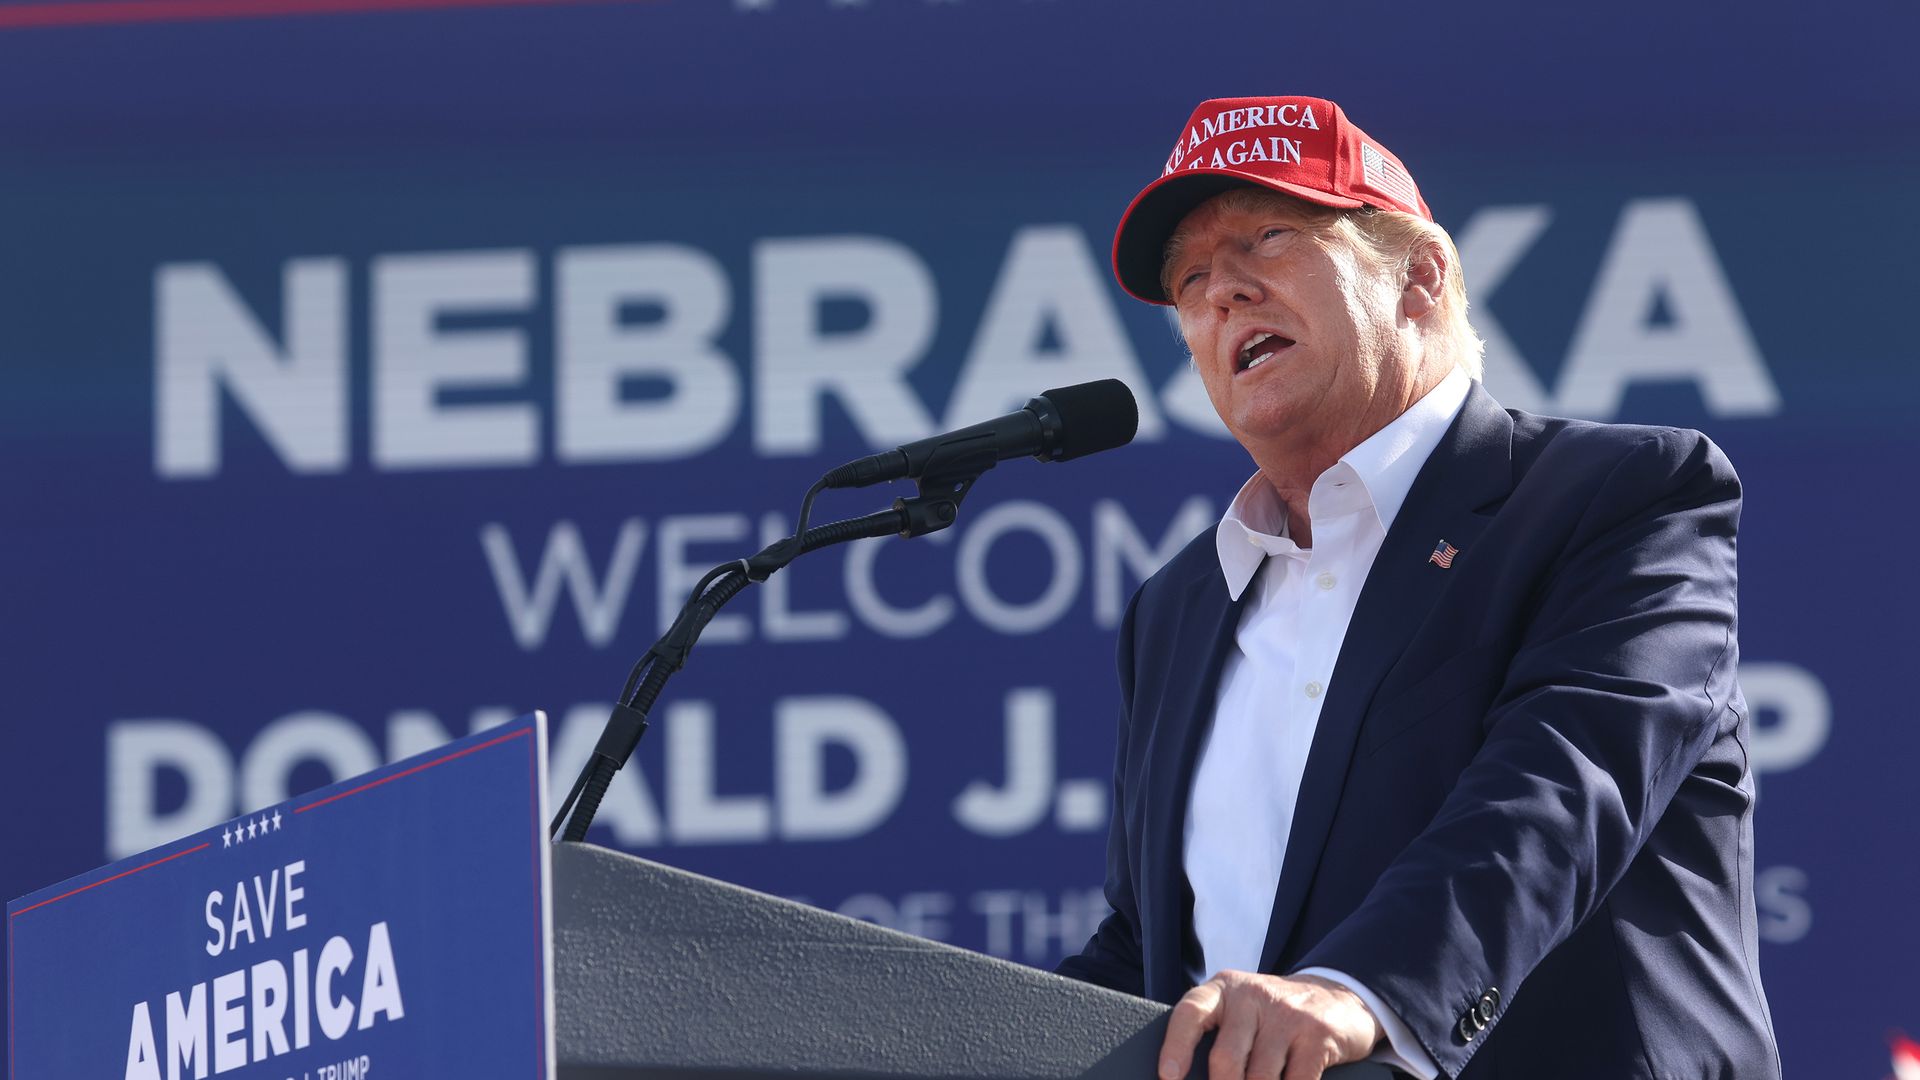 Photo of Donald Trump speaking from a podium and wearing a red MAGA hat